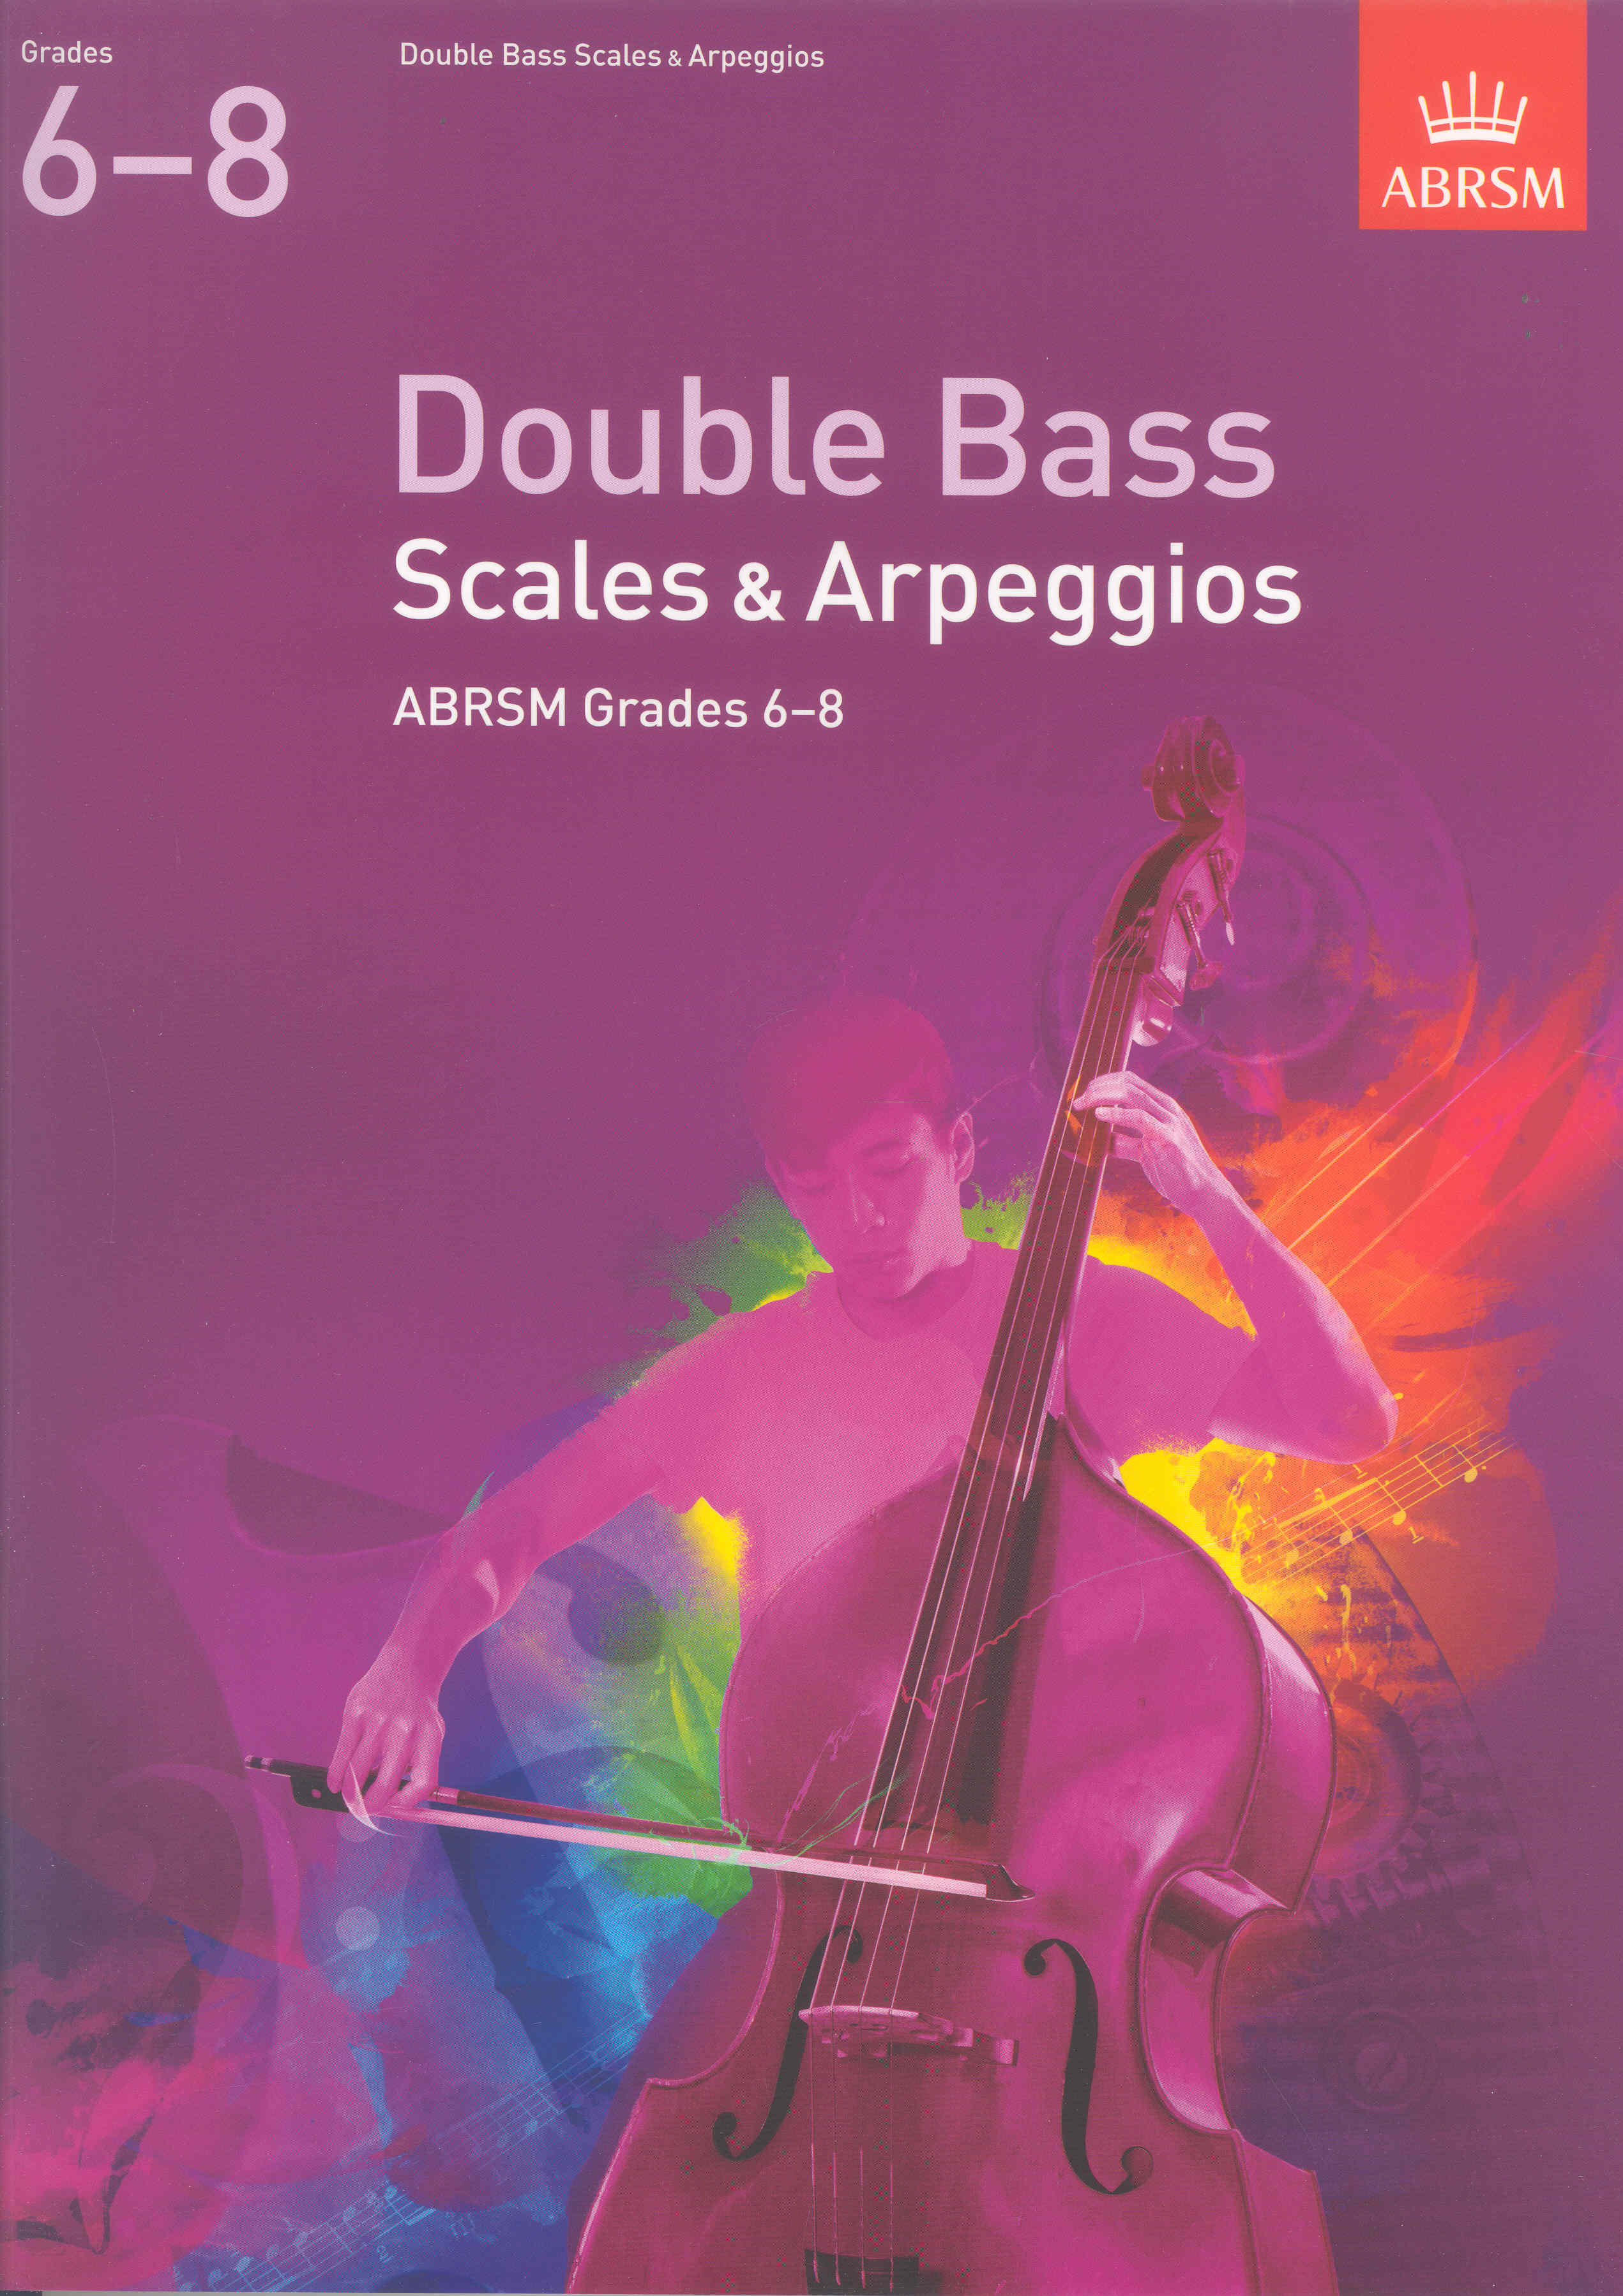 Double Bass Scales & Arpeggios 2012 Gr 6-8 Abrsm Sheet Music Songbook